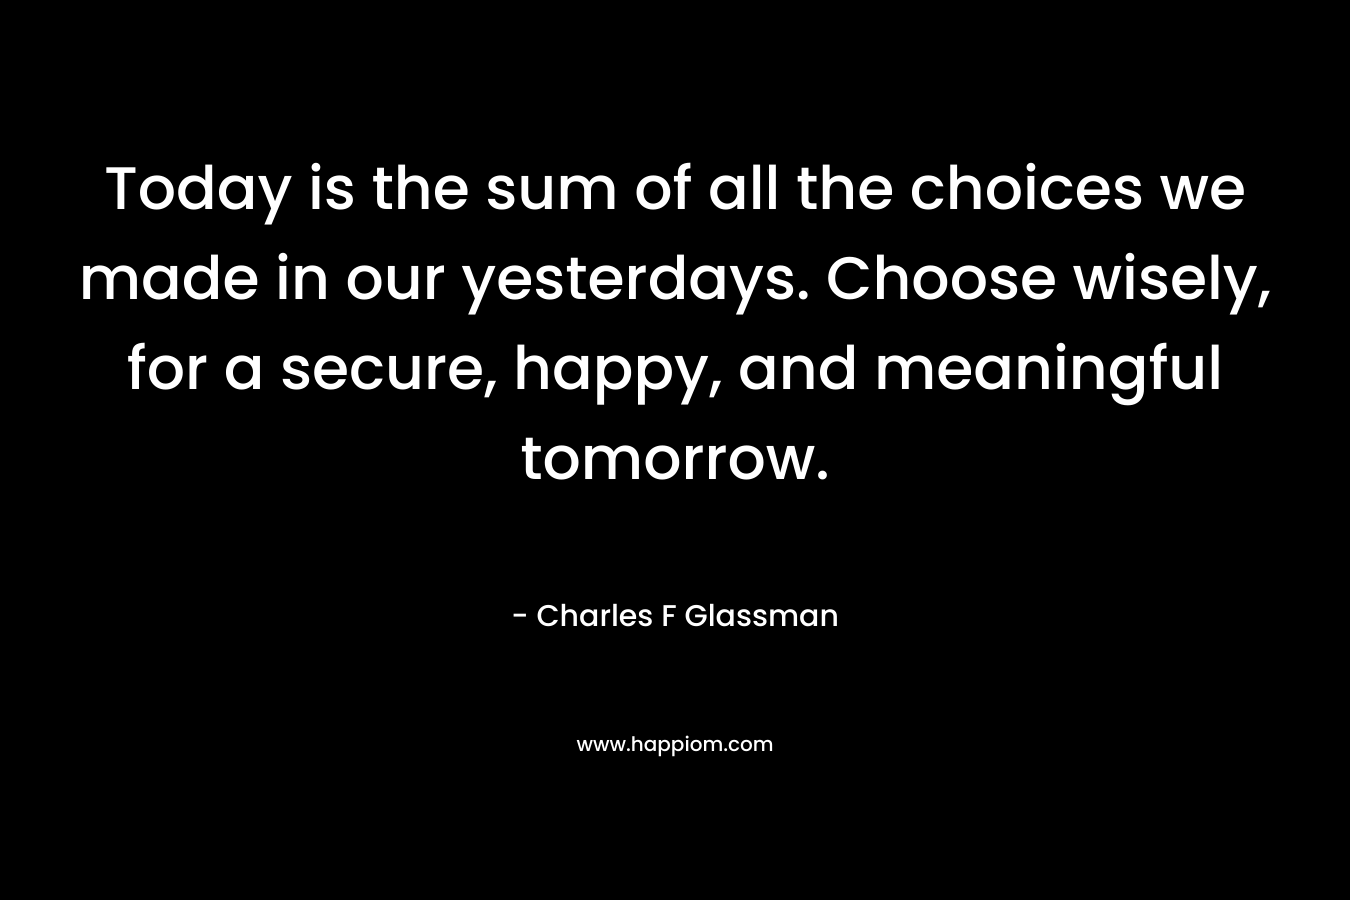 Today is the sum of all the choices we made in our yesterdays. Choose wisely, for a secure, happy, and meaningful tomorrow.